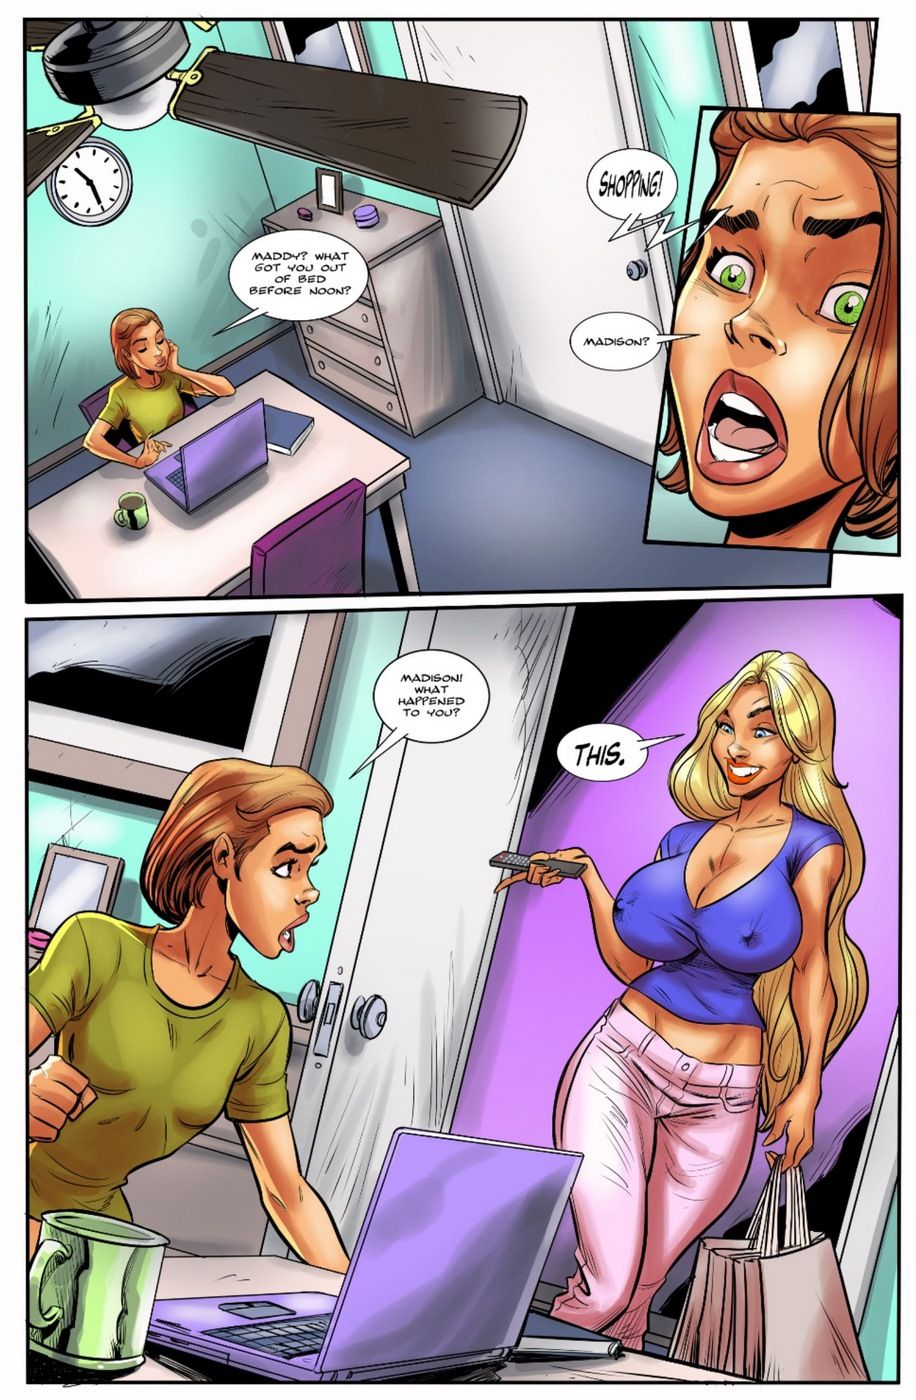 Remote Chance - Issue #3 - Bot page 3